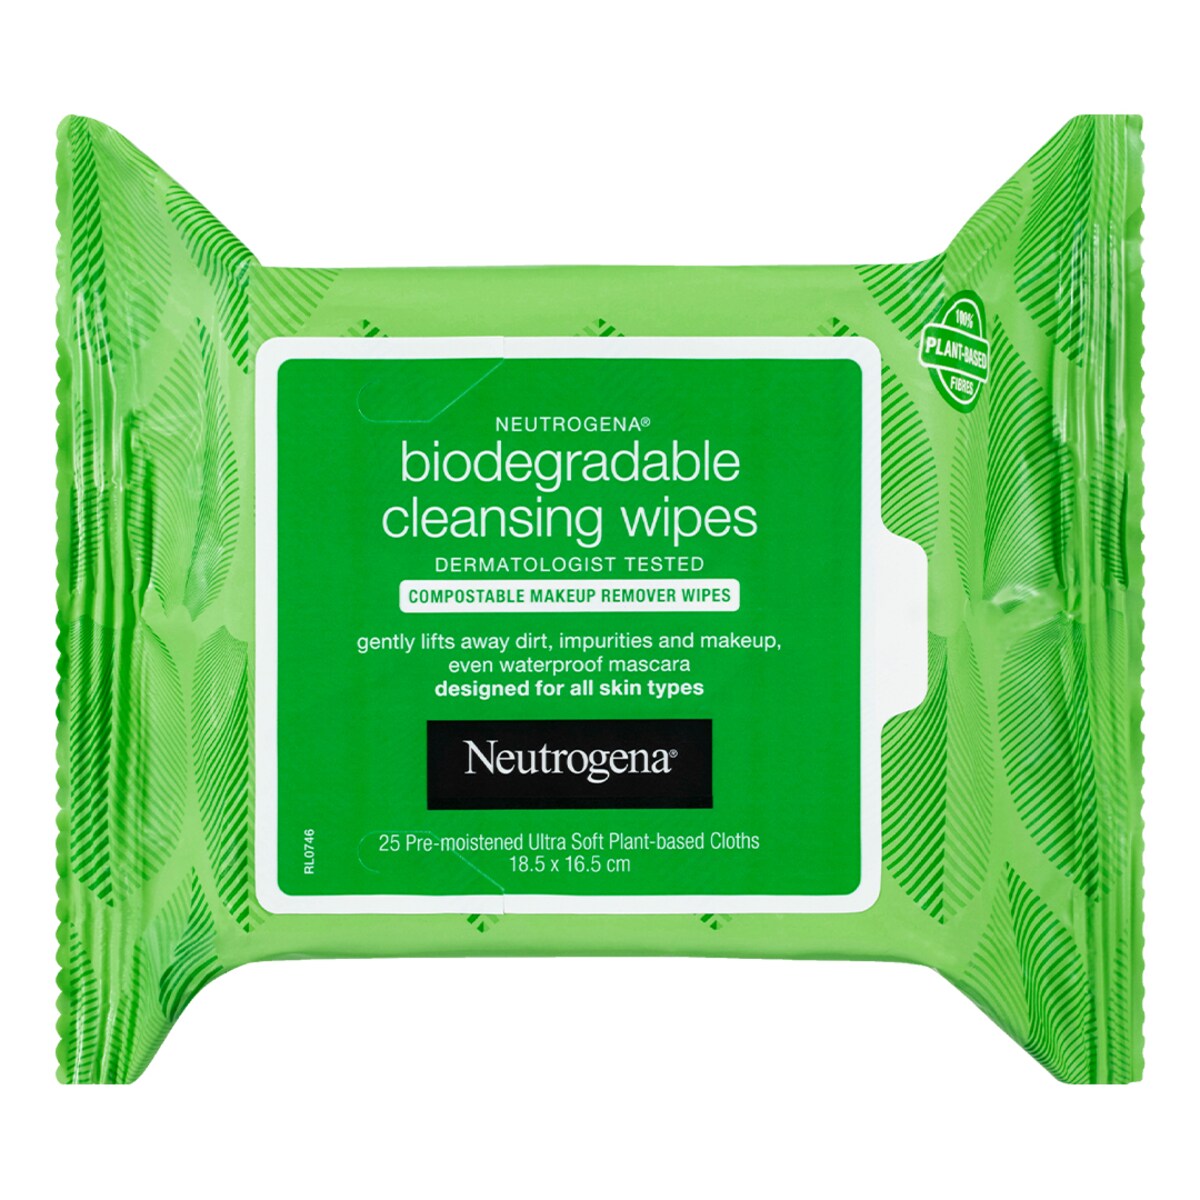 Neutrogena Biodegradable Cleansing Face Wipes 25 Pack